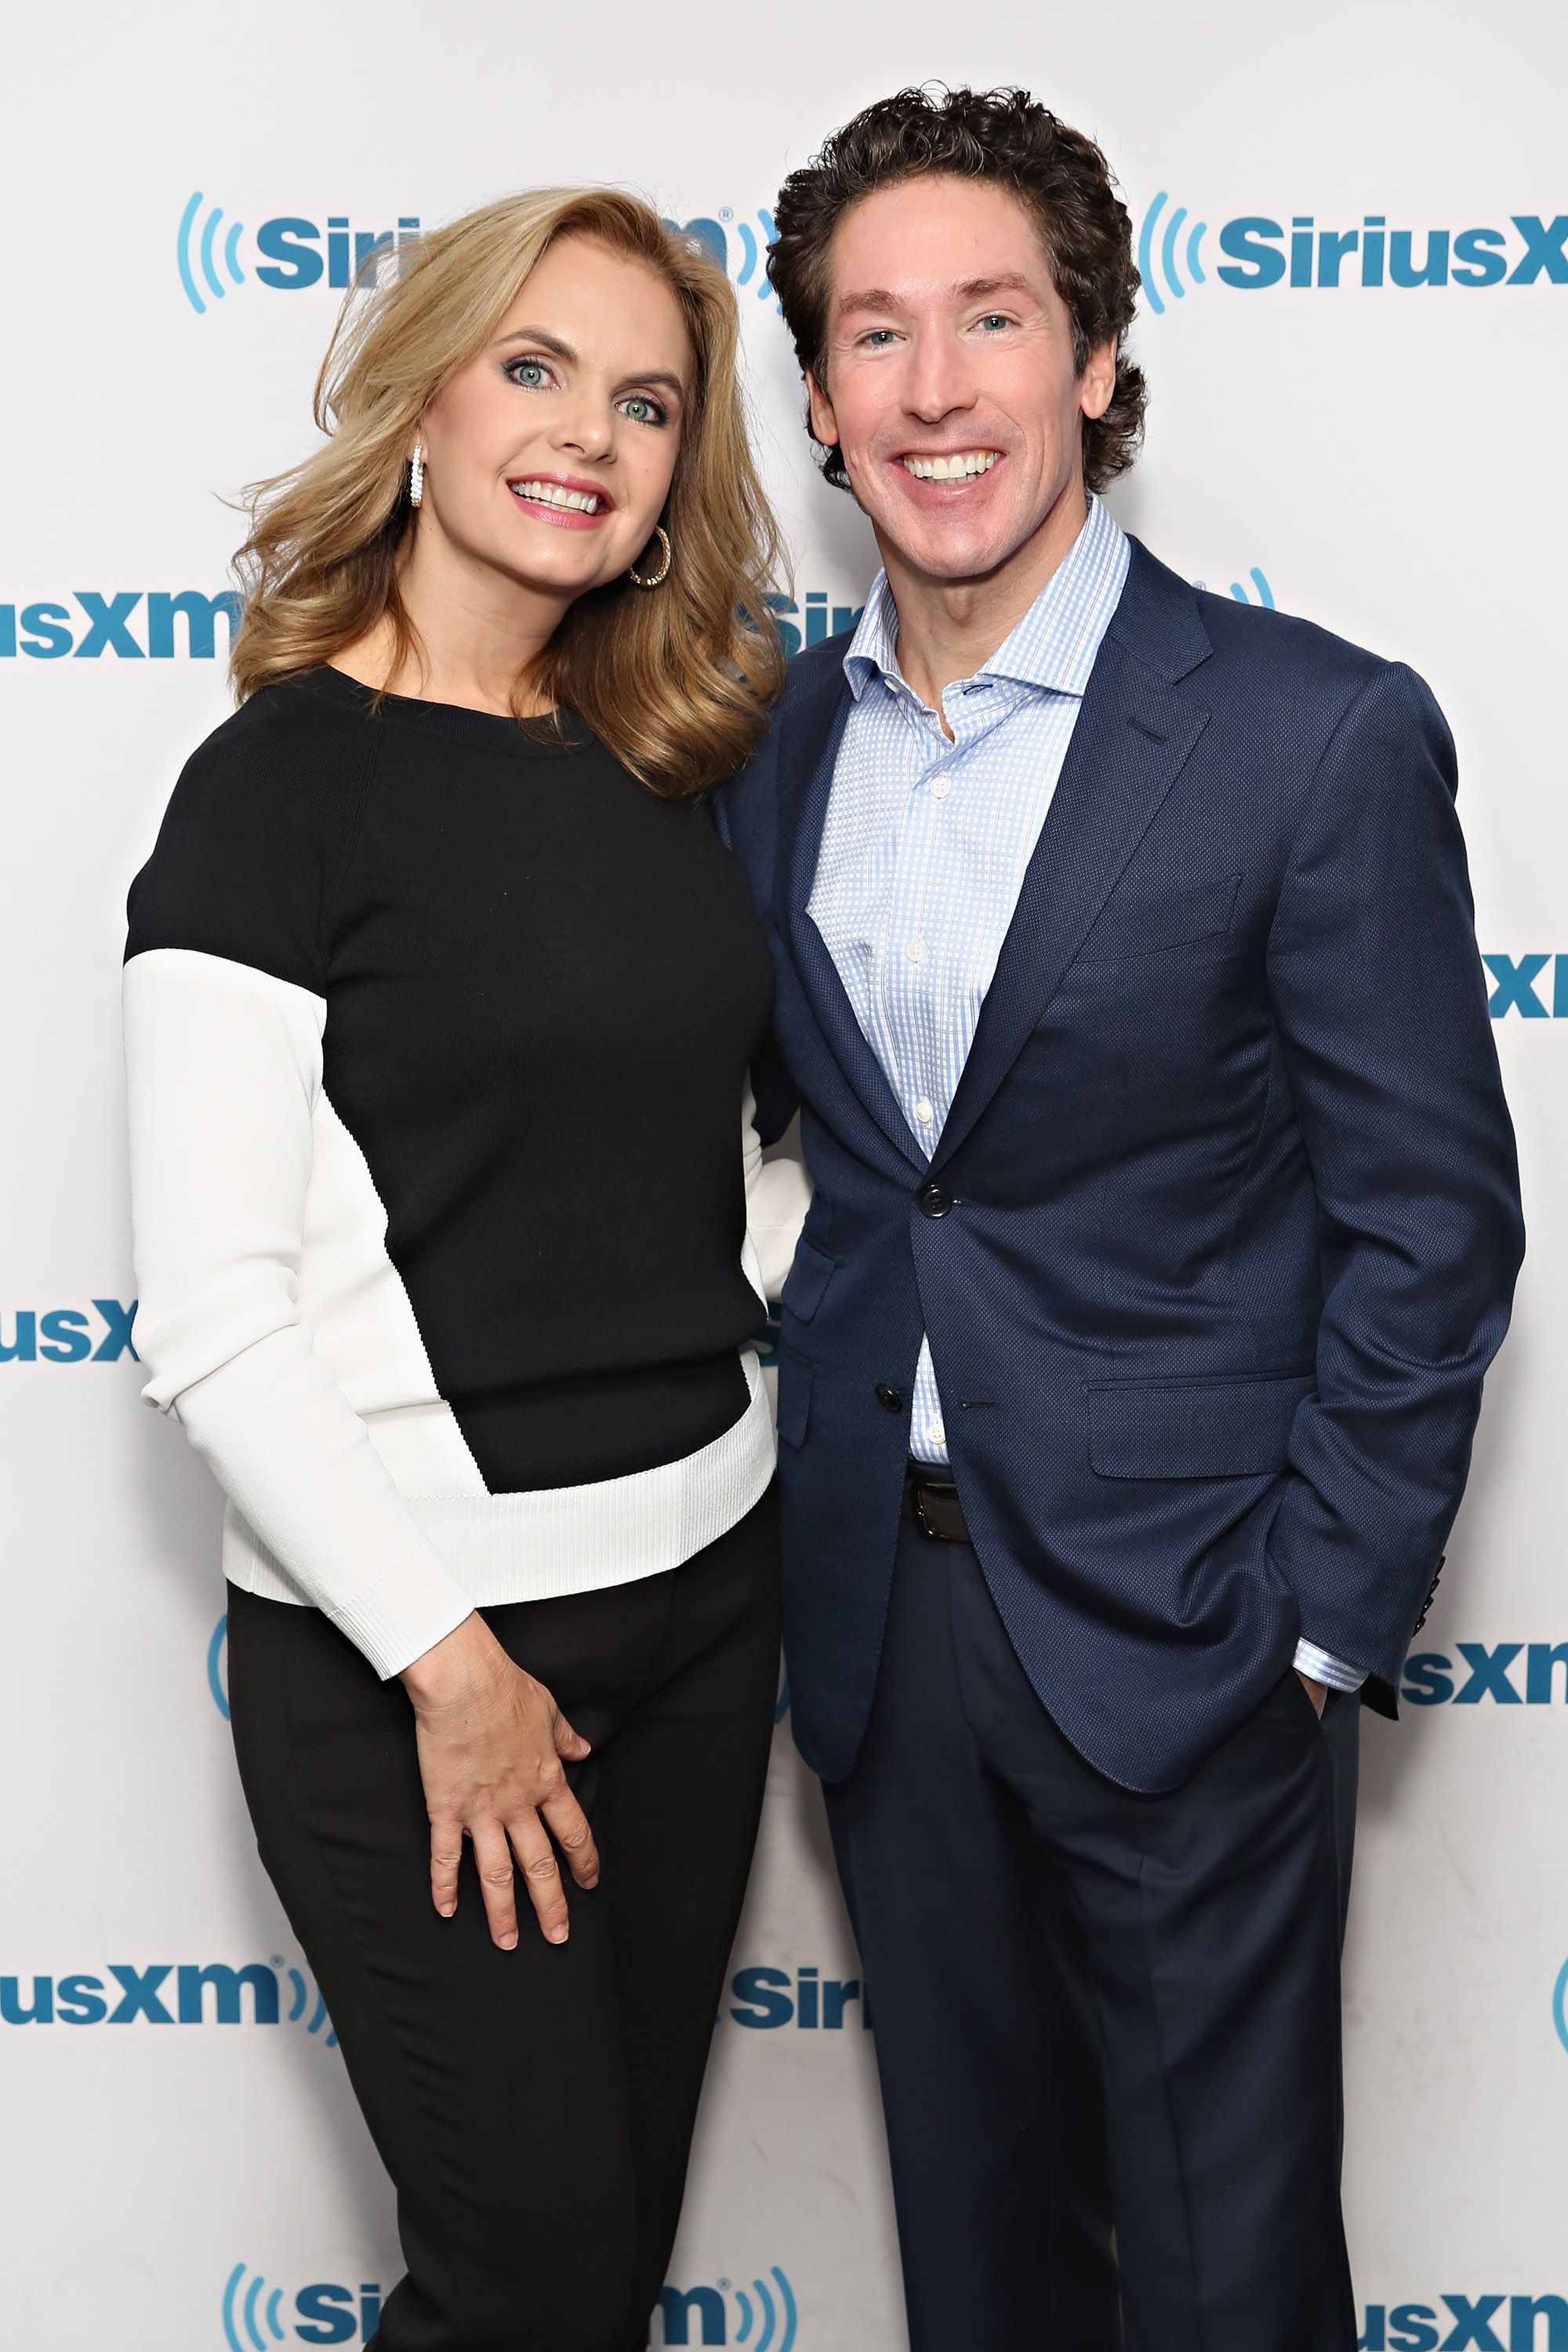 Victoria and Joel Osteen at SiriusXM Studios in 2016 in New York City | Source: Getty Images